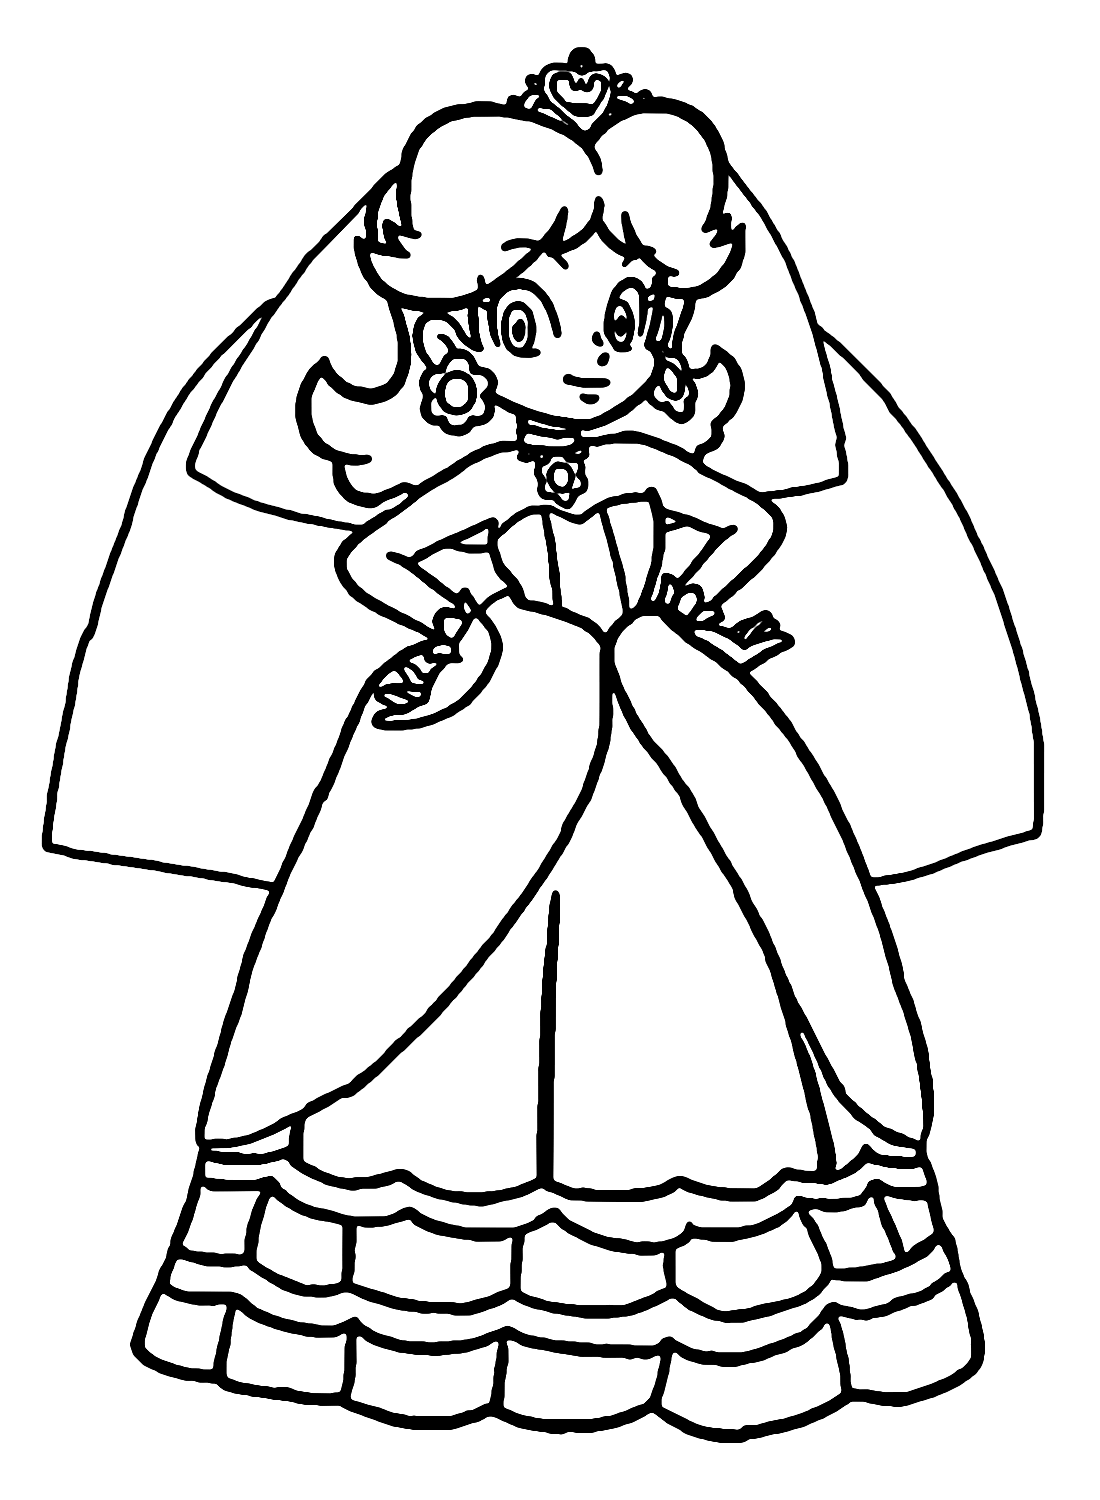 Princess Daisy Wedding Dress Coloring Pages